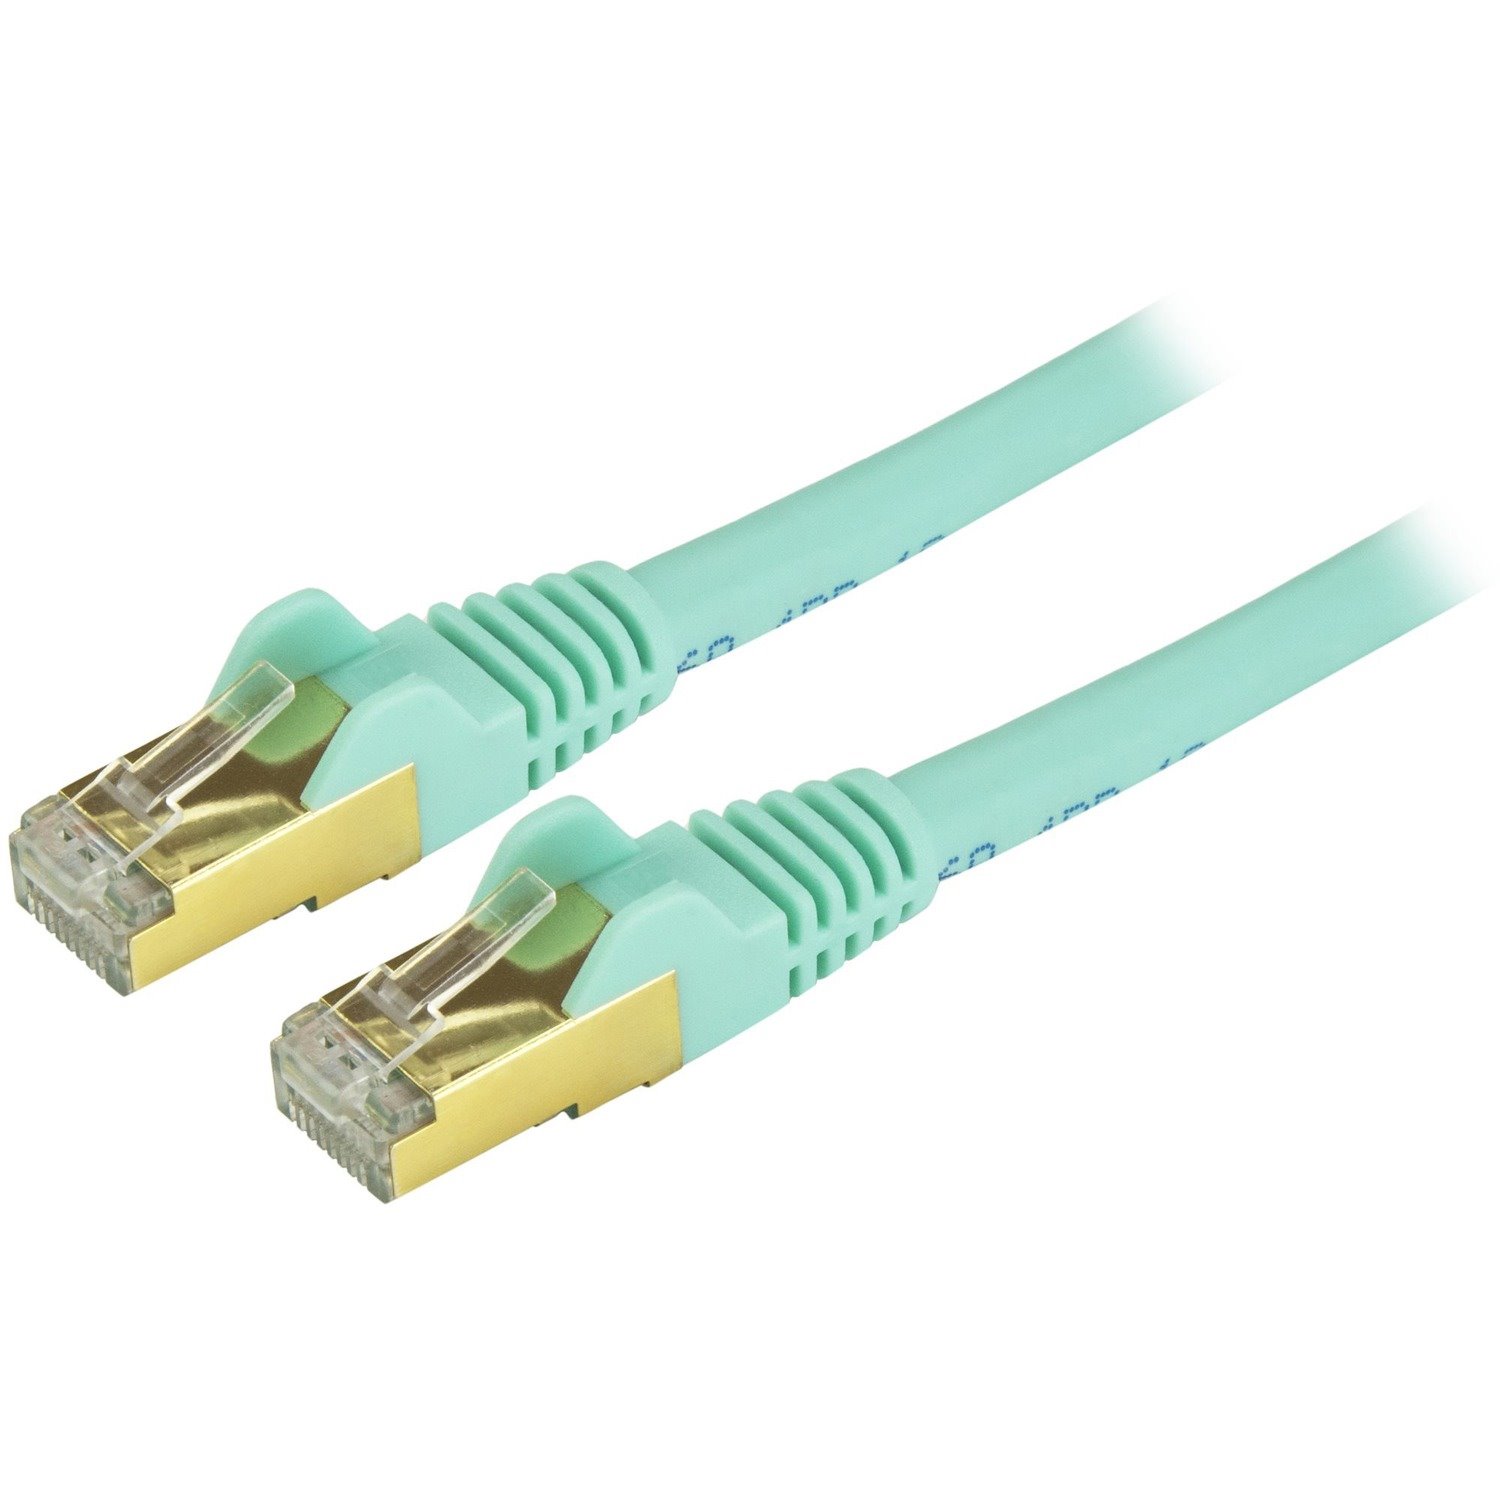 StarTech.com 4ft CAT6a Ethernet Cable - 10 Gigabit Category 6a Shielded Snagless 100W PoE Patch Cord - 10GbE Aqua UL Certified Wiring/TIA